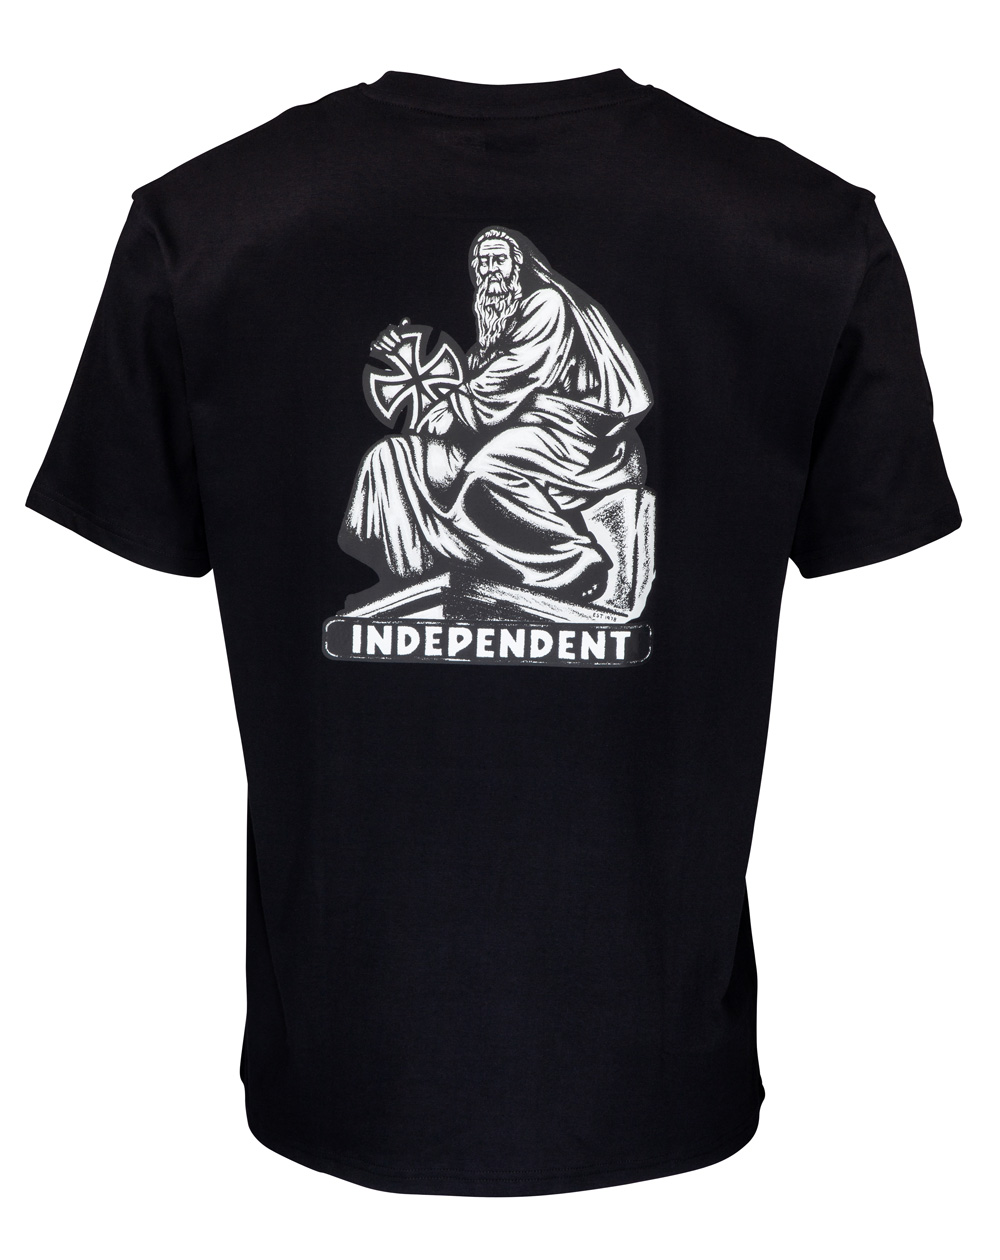 Independent Set In Stone T-Shirt Homme Black